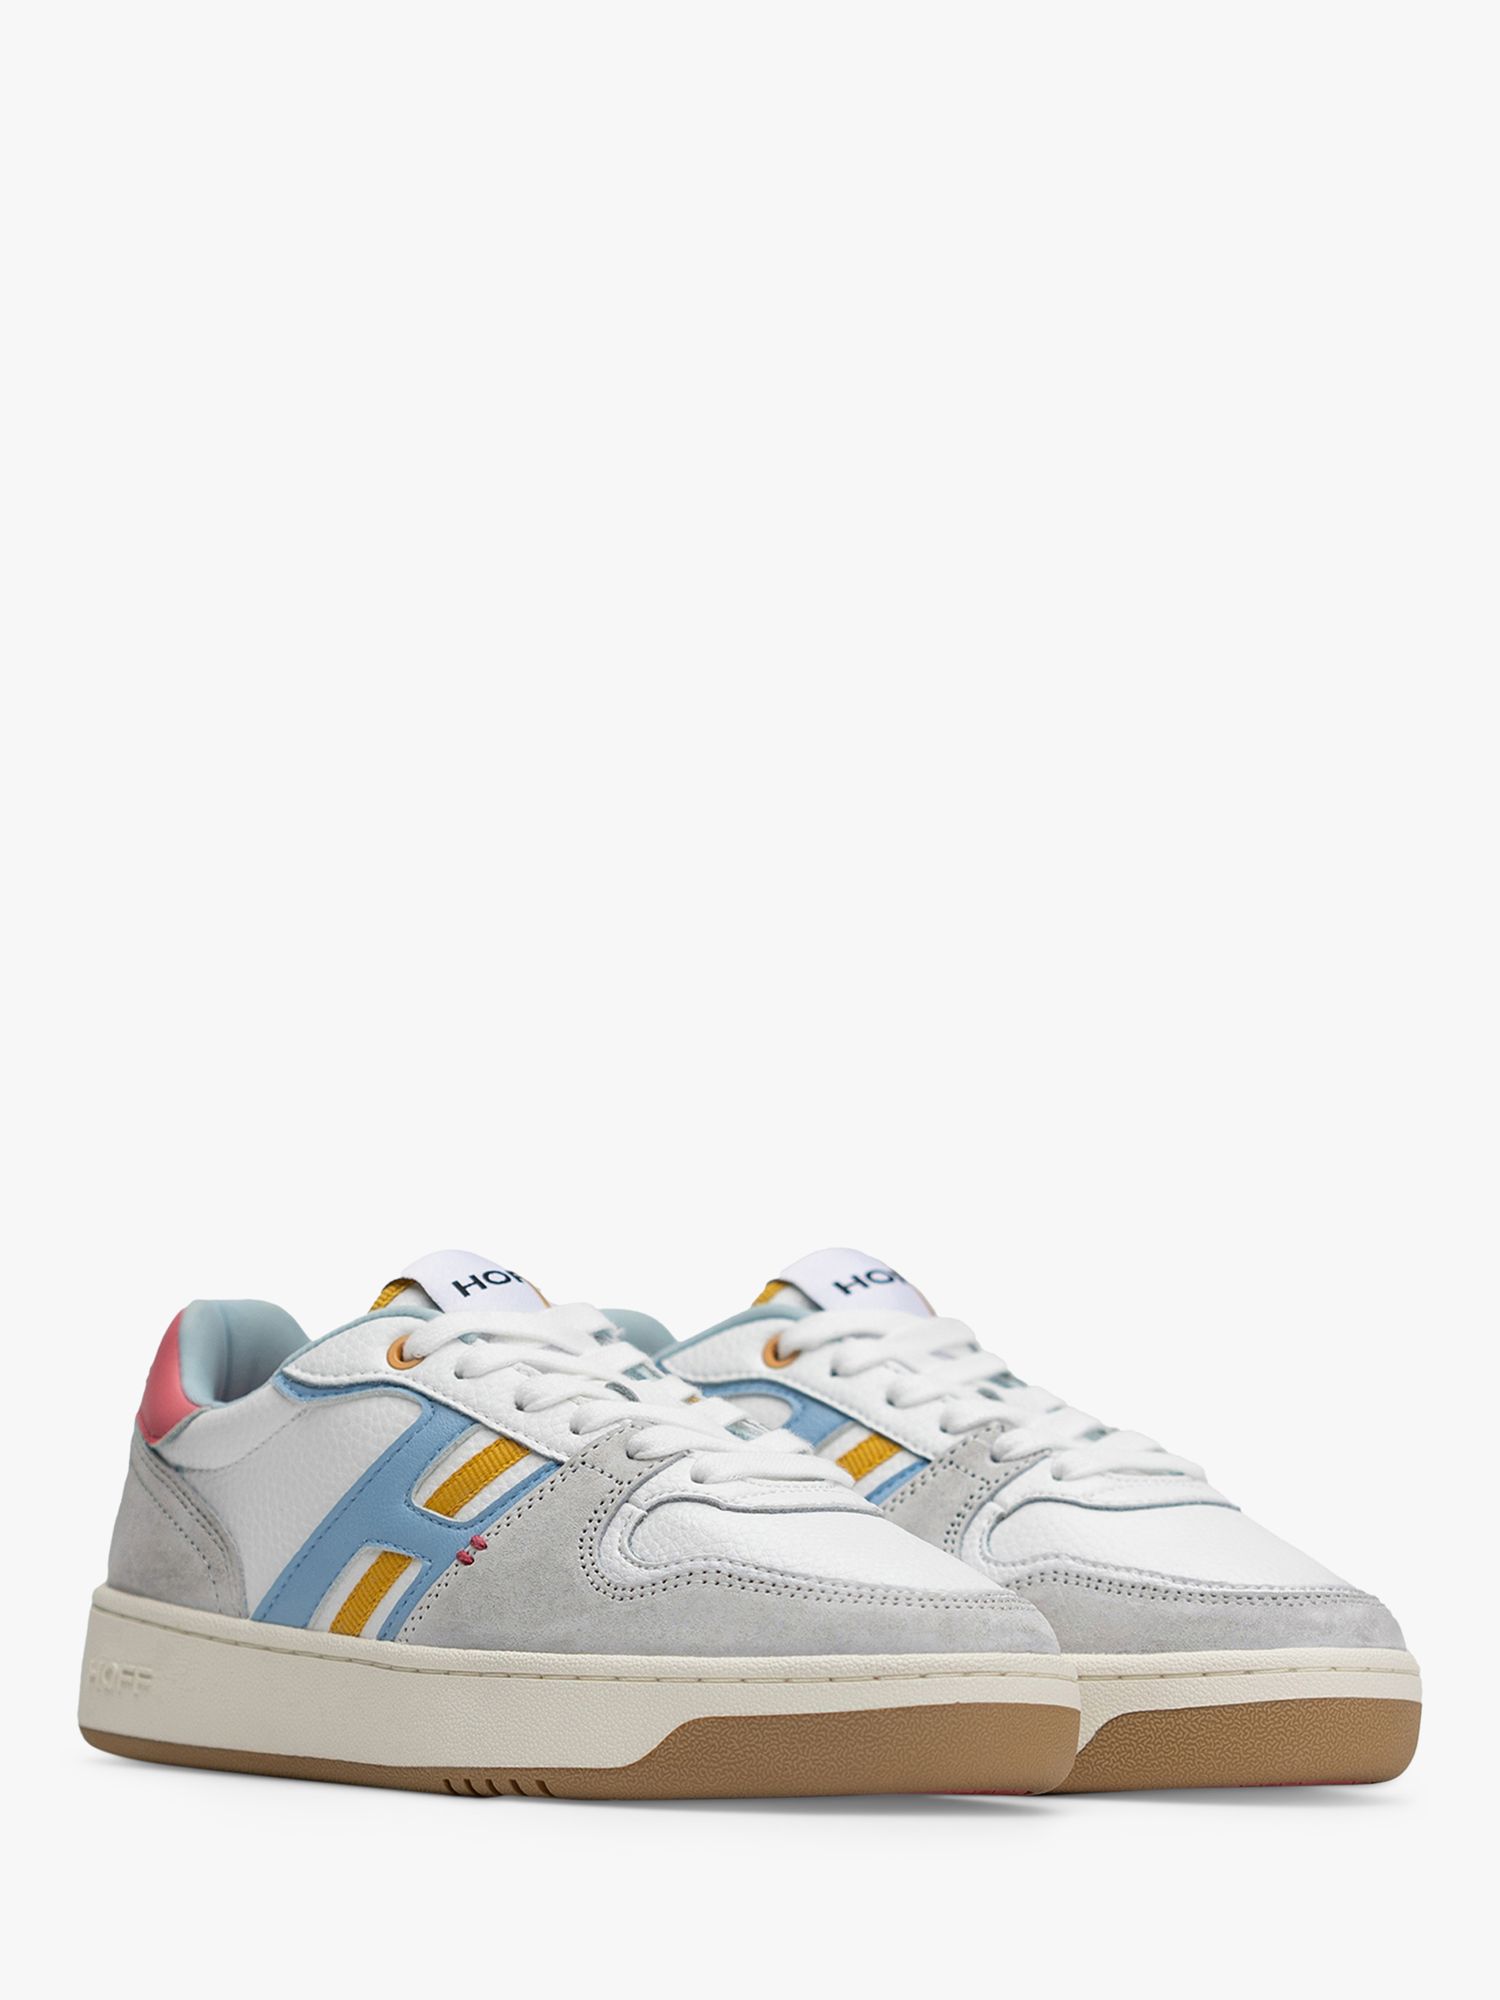 Buy HOFF Gare du Nord Low Top Leather Trainers, Multi Online at johnlewis.com